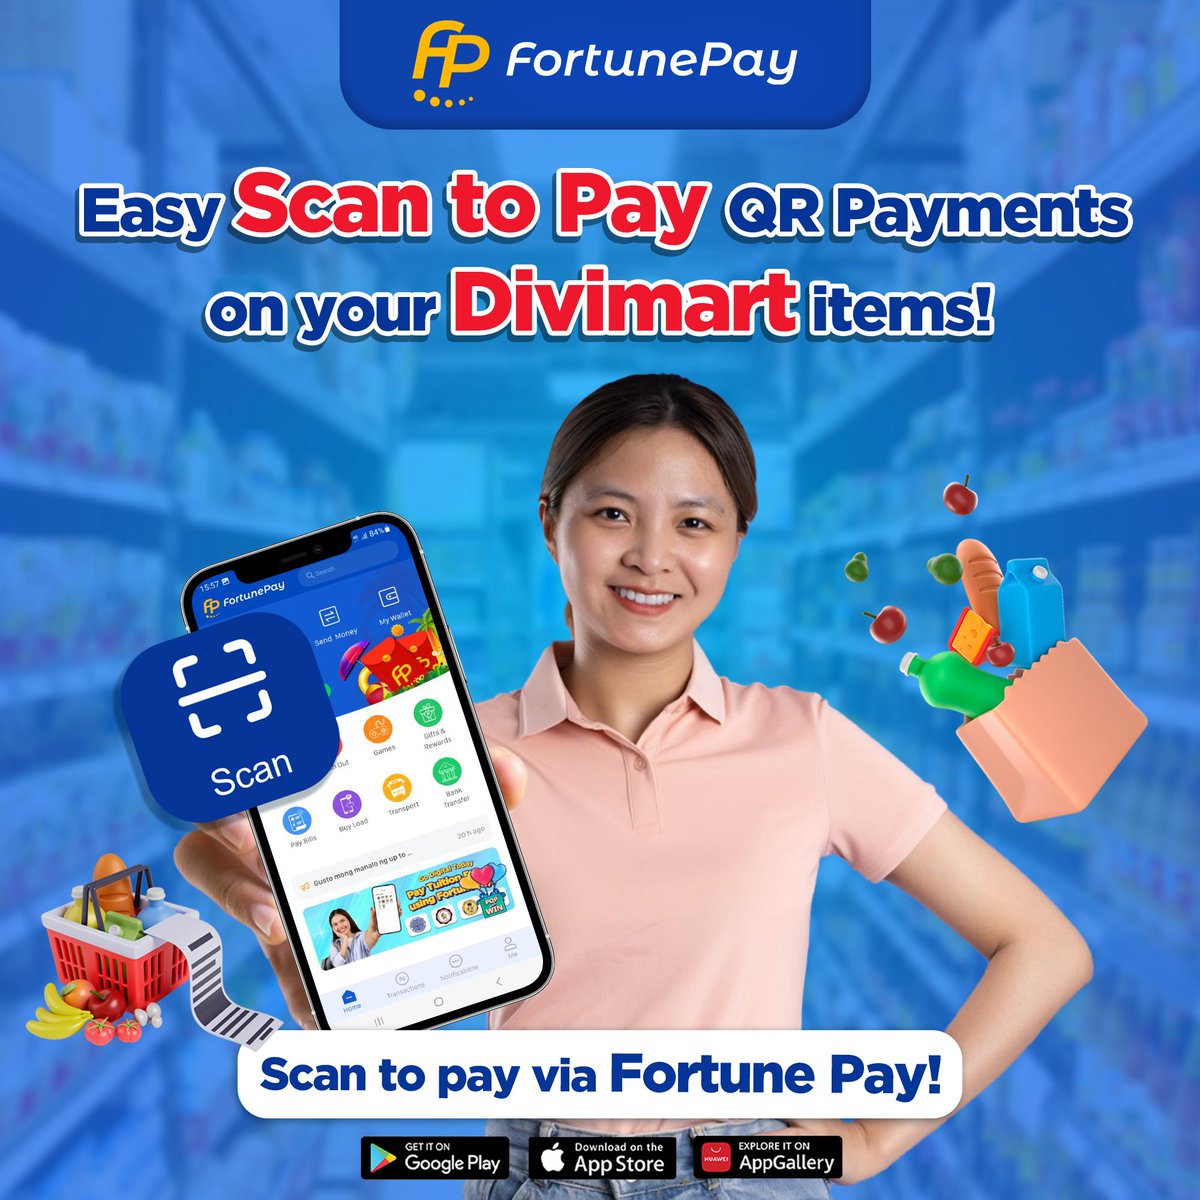 Conveniently Scan to Pay your favorite Divimart items with Fortune Pay.
Pinadali na ang inyong pag shop!
#FortunePay #EWallet #ScanToPay #Divimart #QRPayments